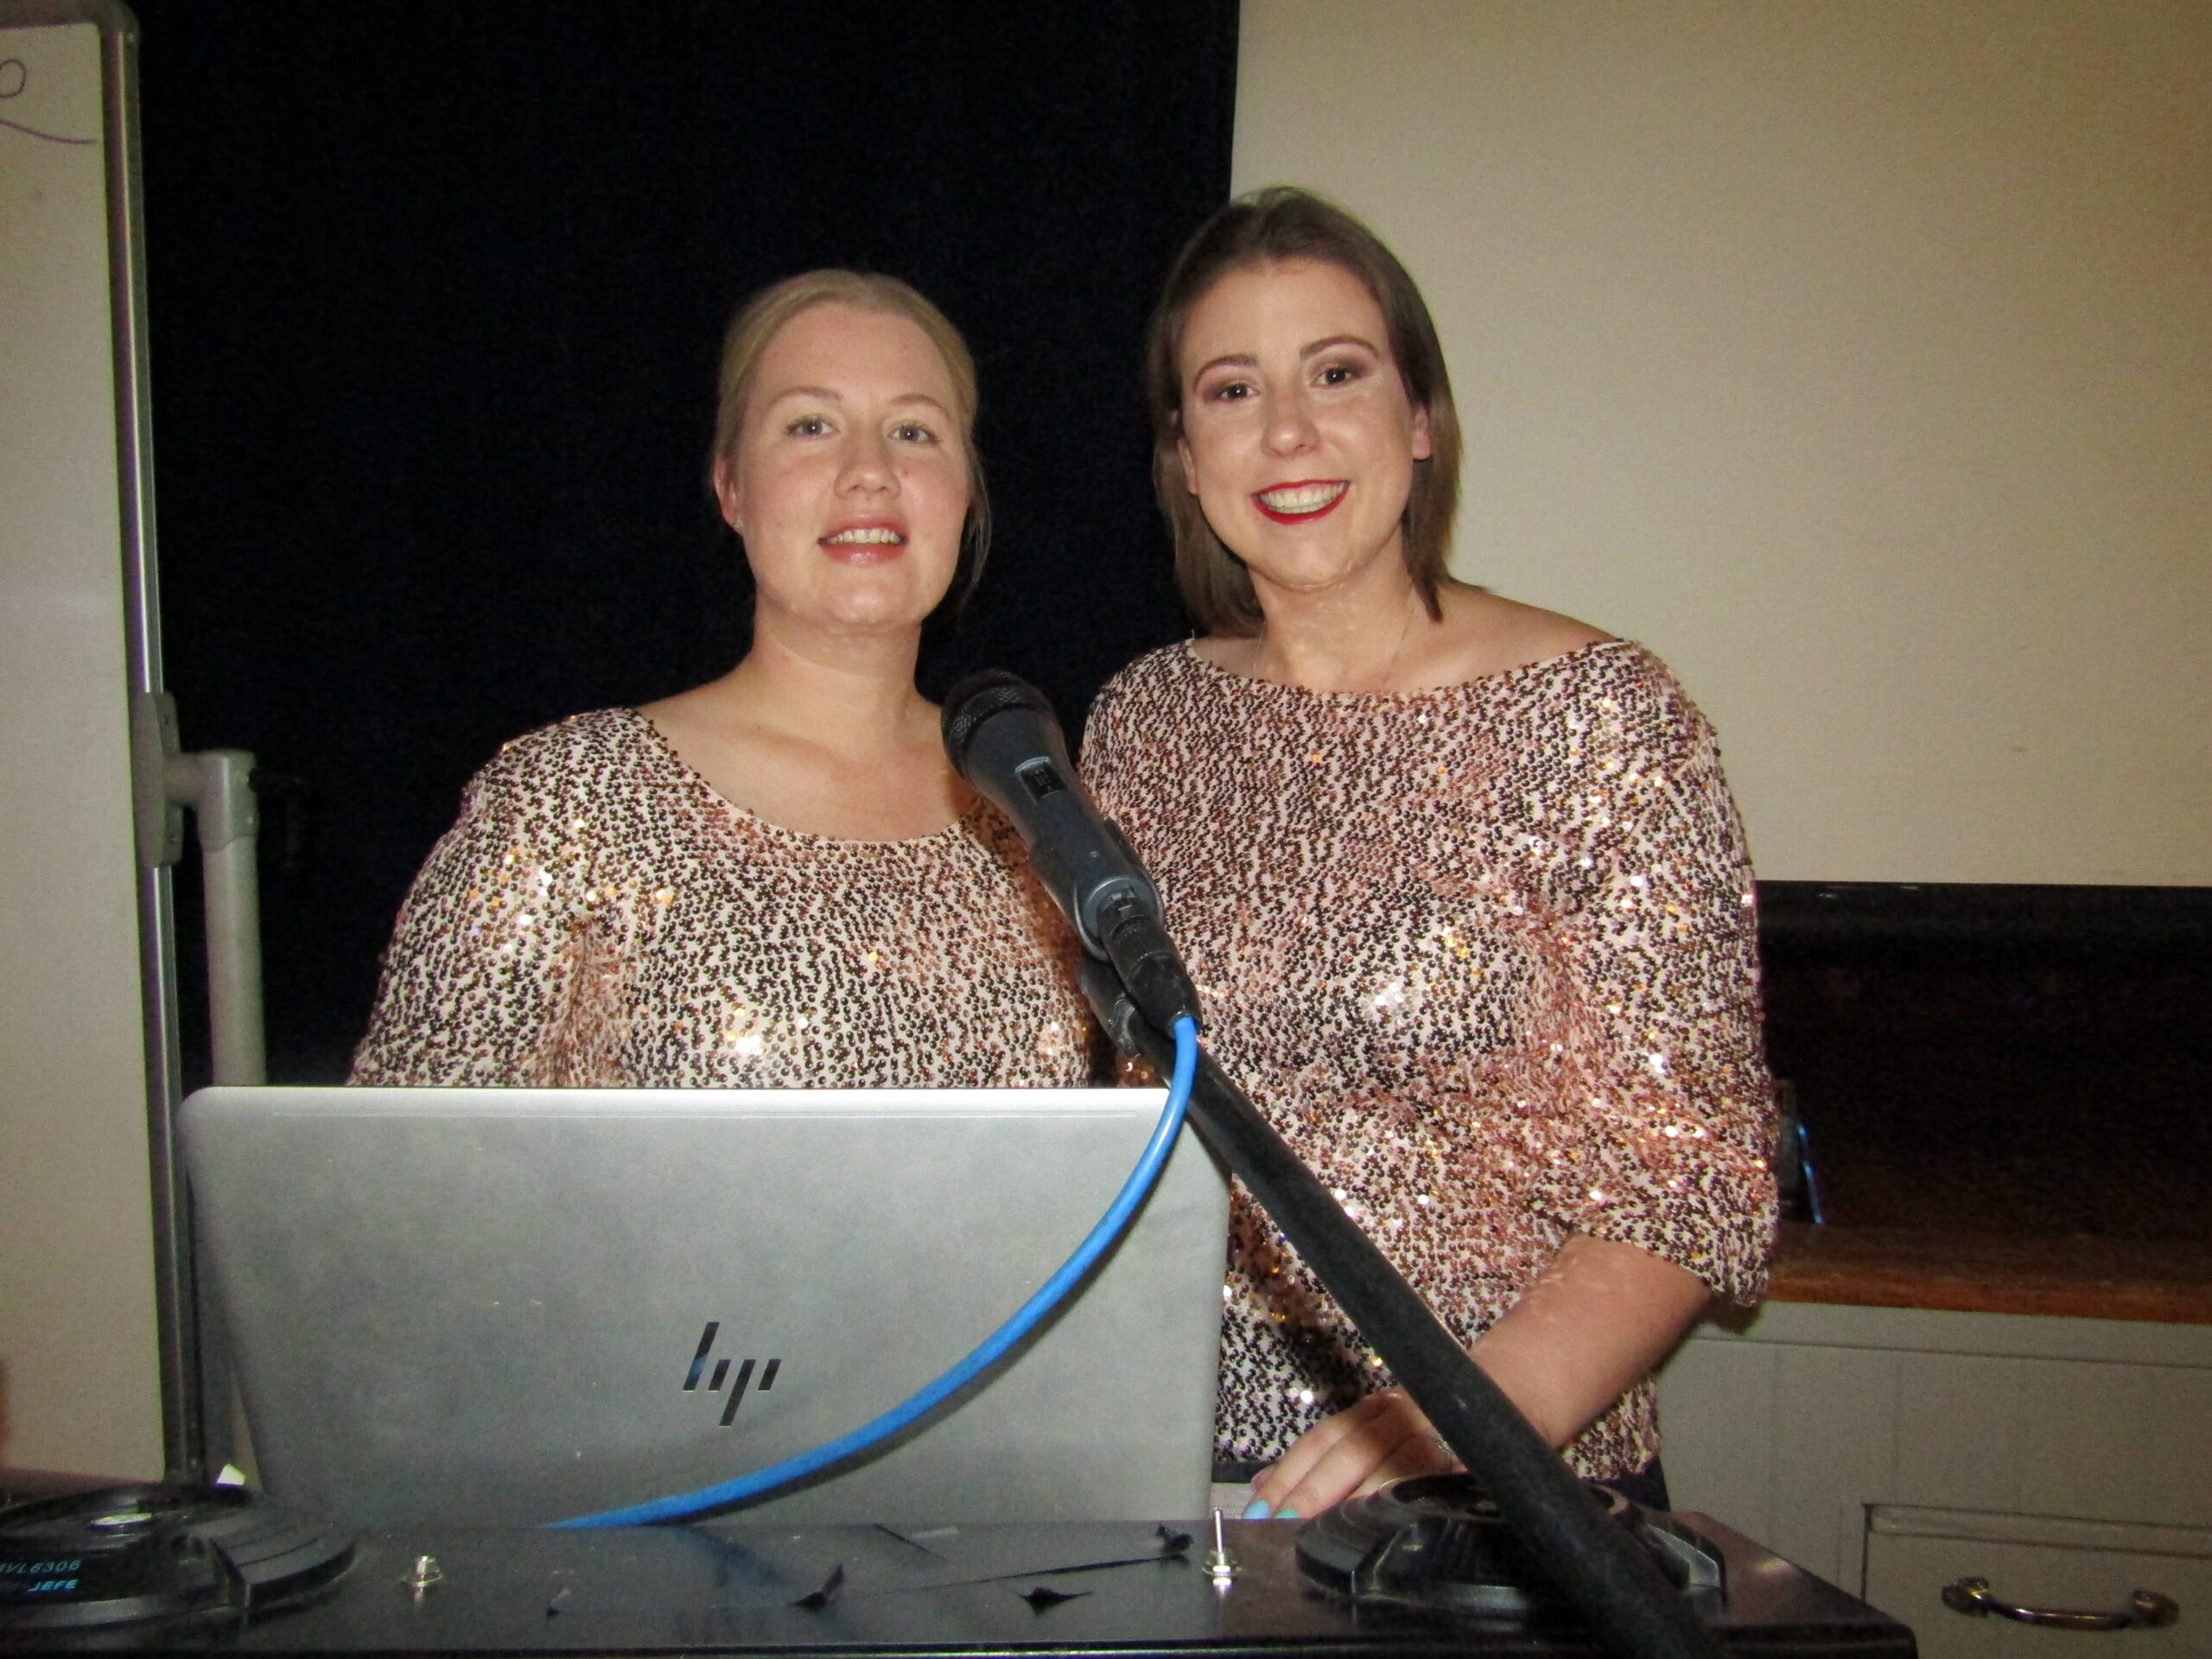 Introducing your 2021 Stars of Narrabri: Kristy Pattison and Sarah Gleeson